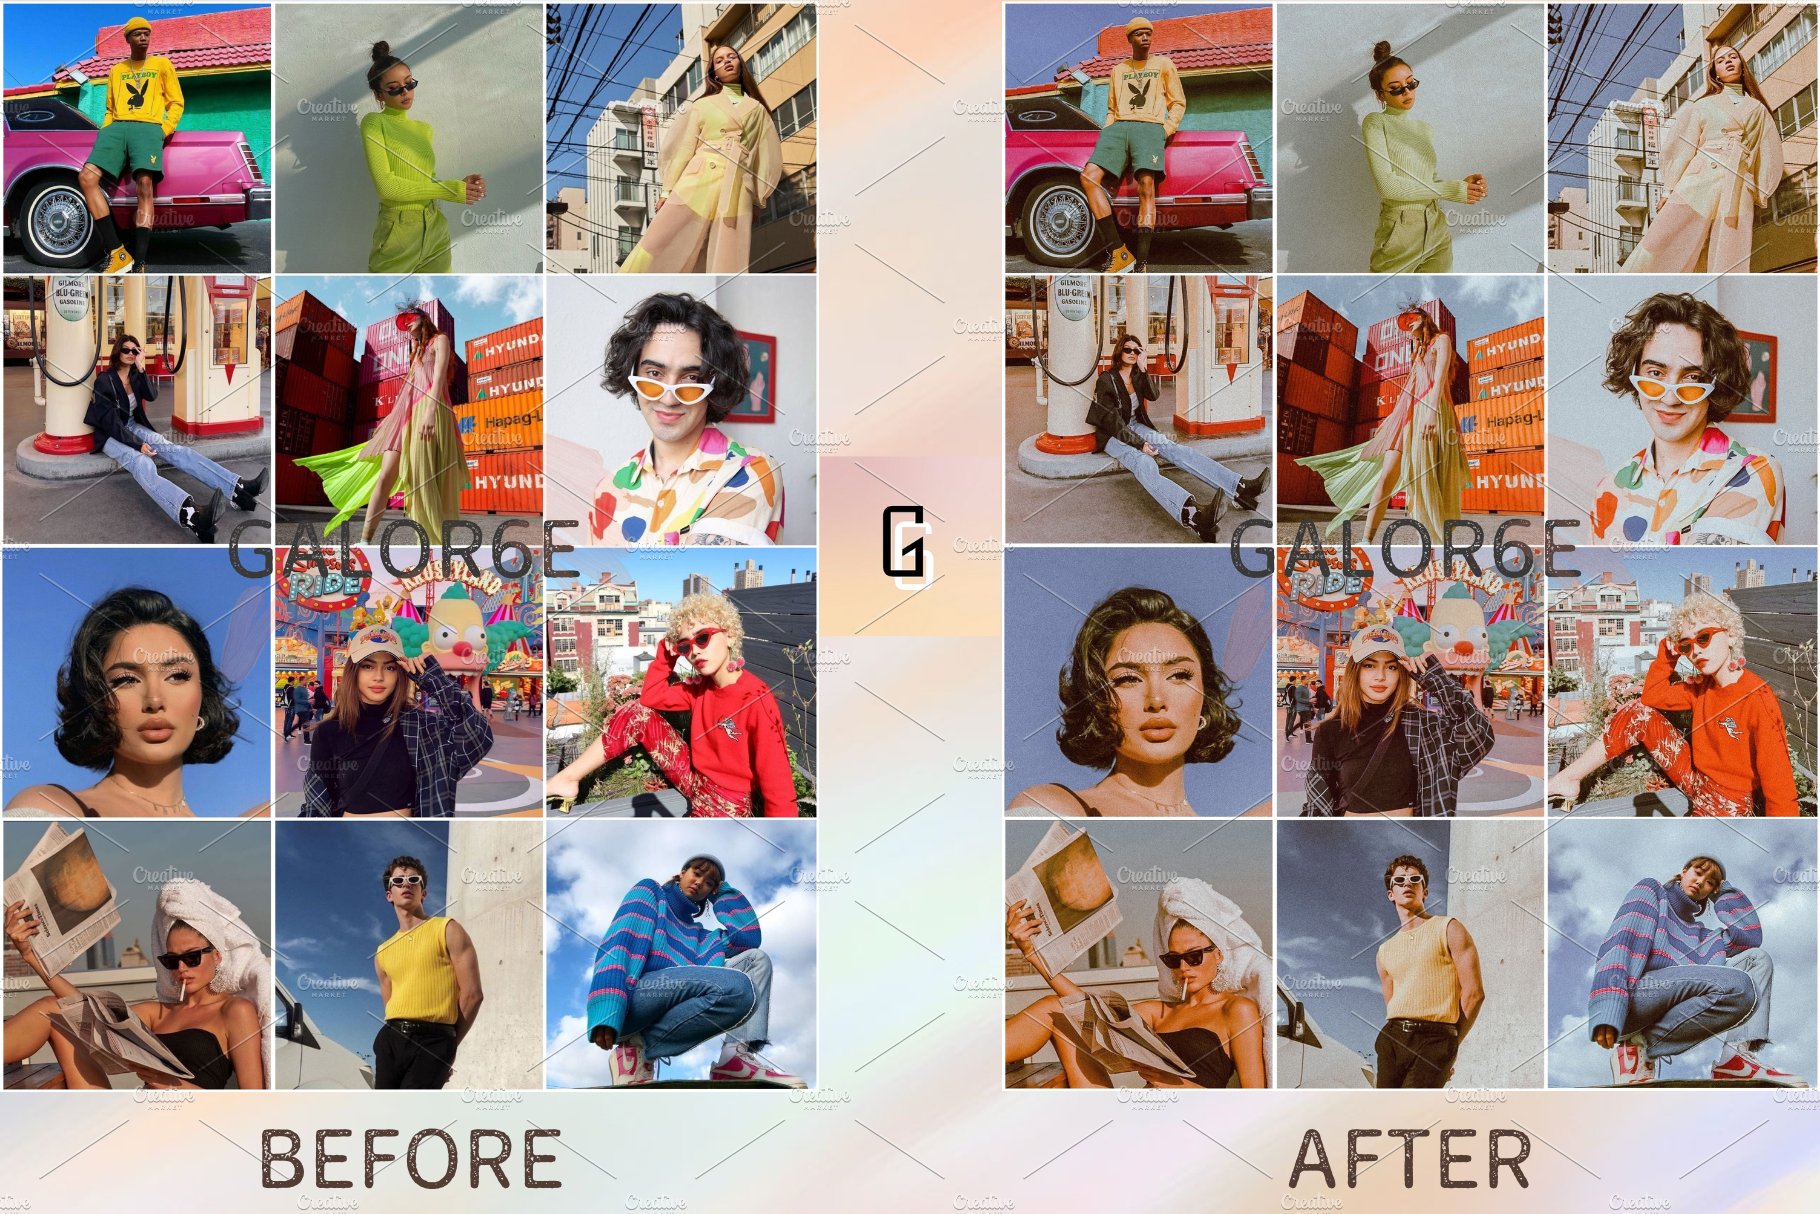 Lightroom Preset 70s VIBE by GALOR6Epreview image.